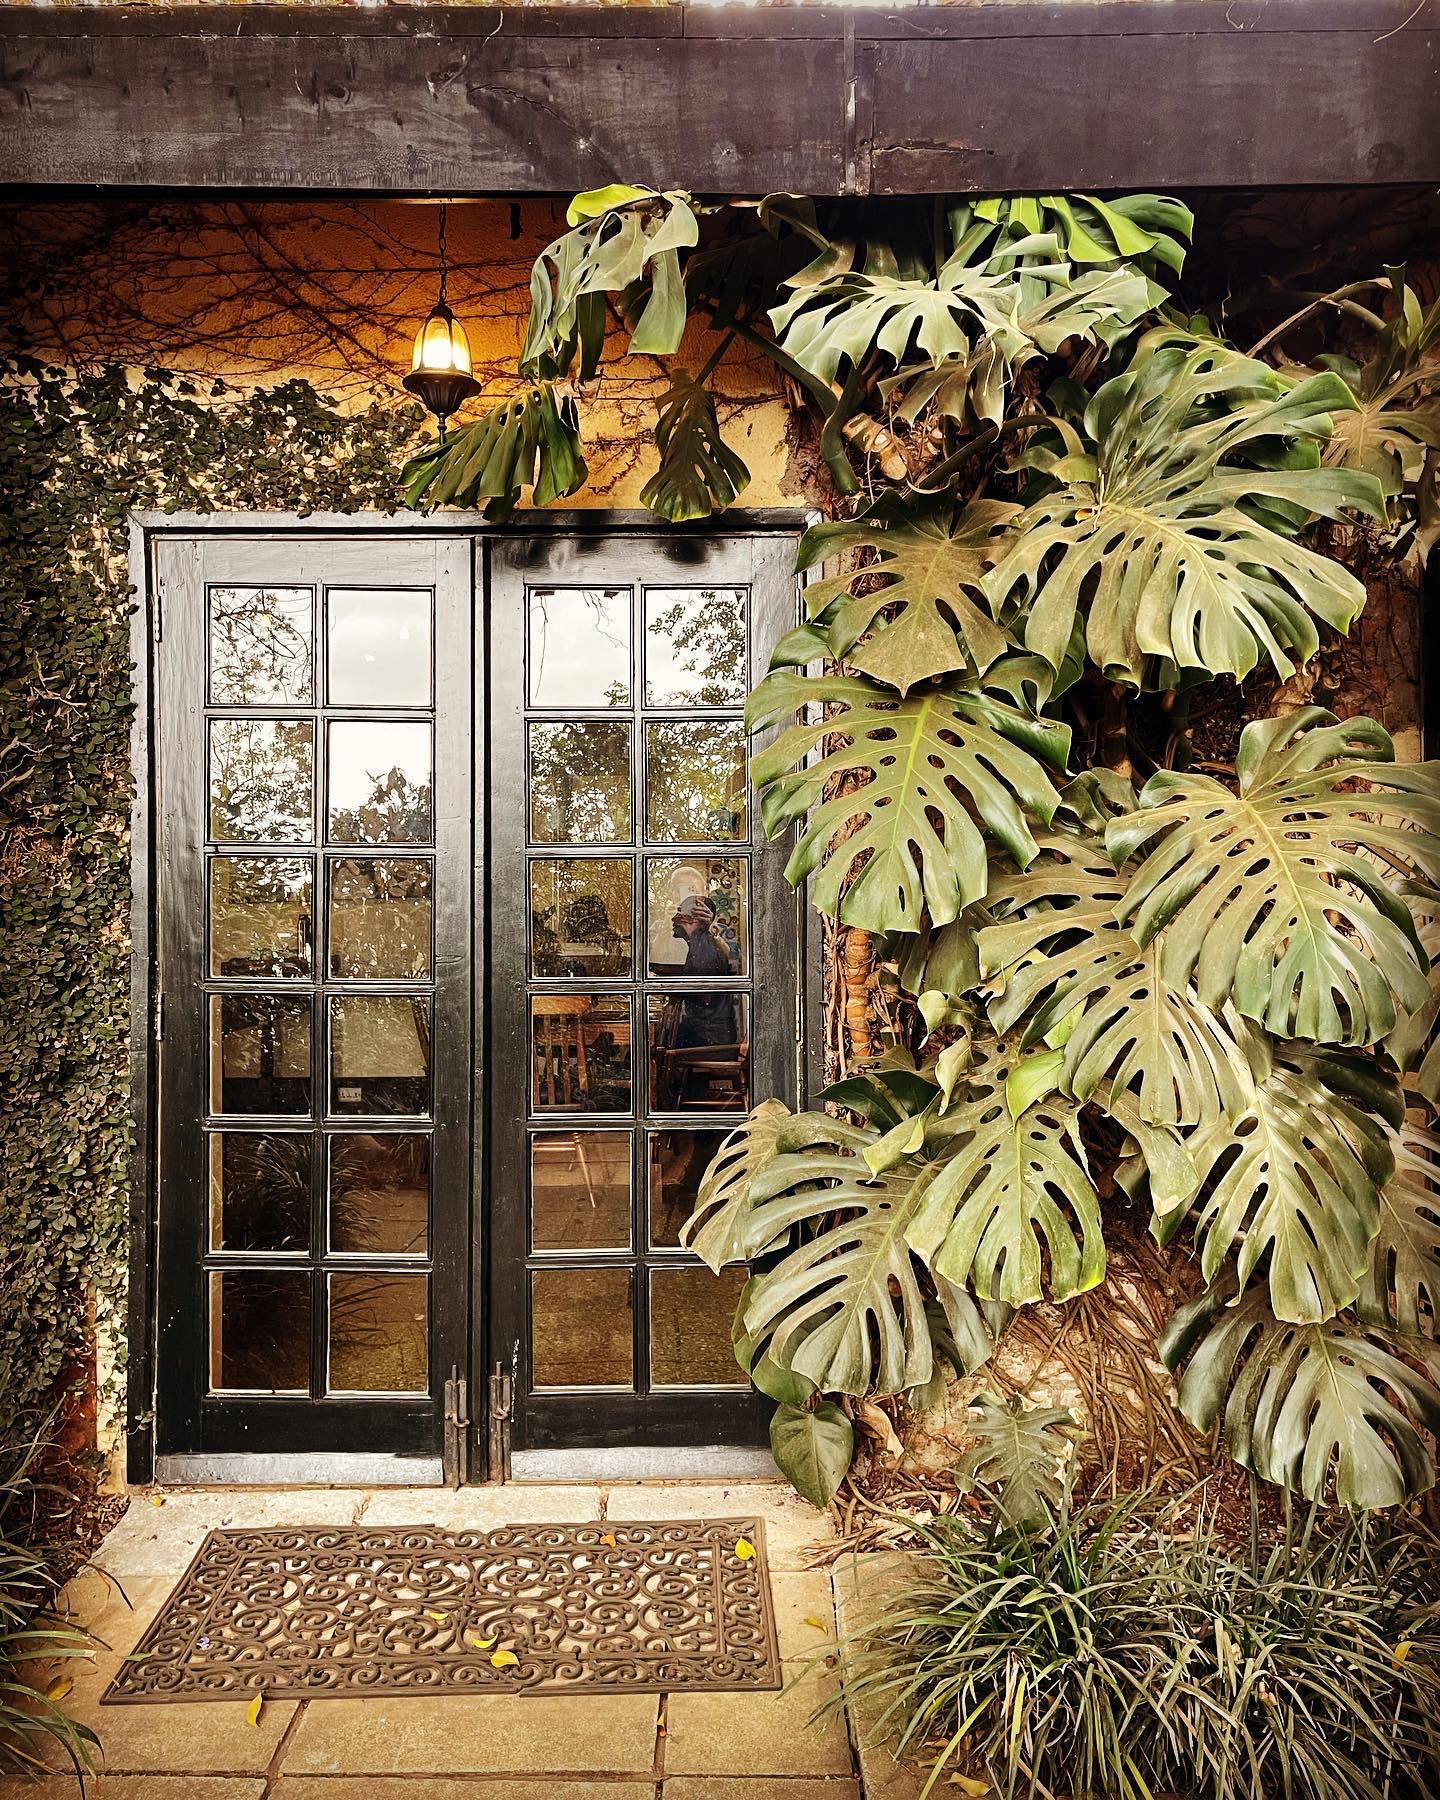 With well established gardens throughout the property there are plenty of alcoves to sit and contemplate or just listen to the sounds of nature #serenity #ethereal #whimsical #secretgarden #quiet #calm #garden #interiordesign #decor